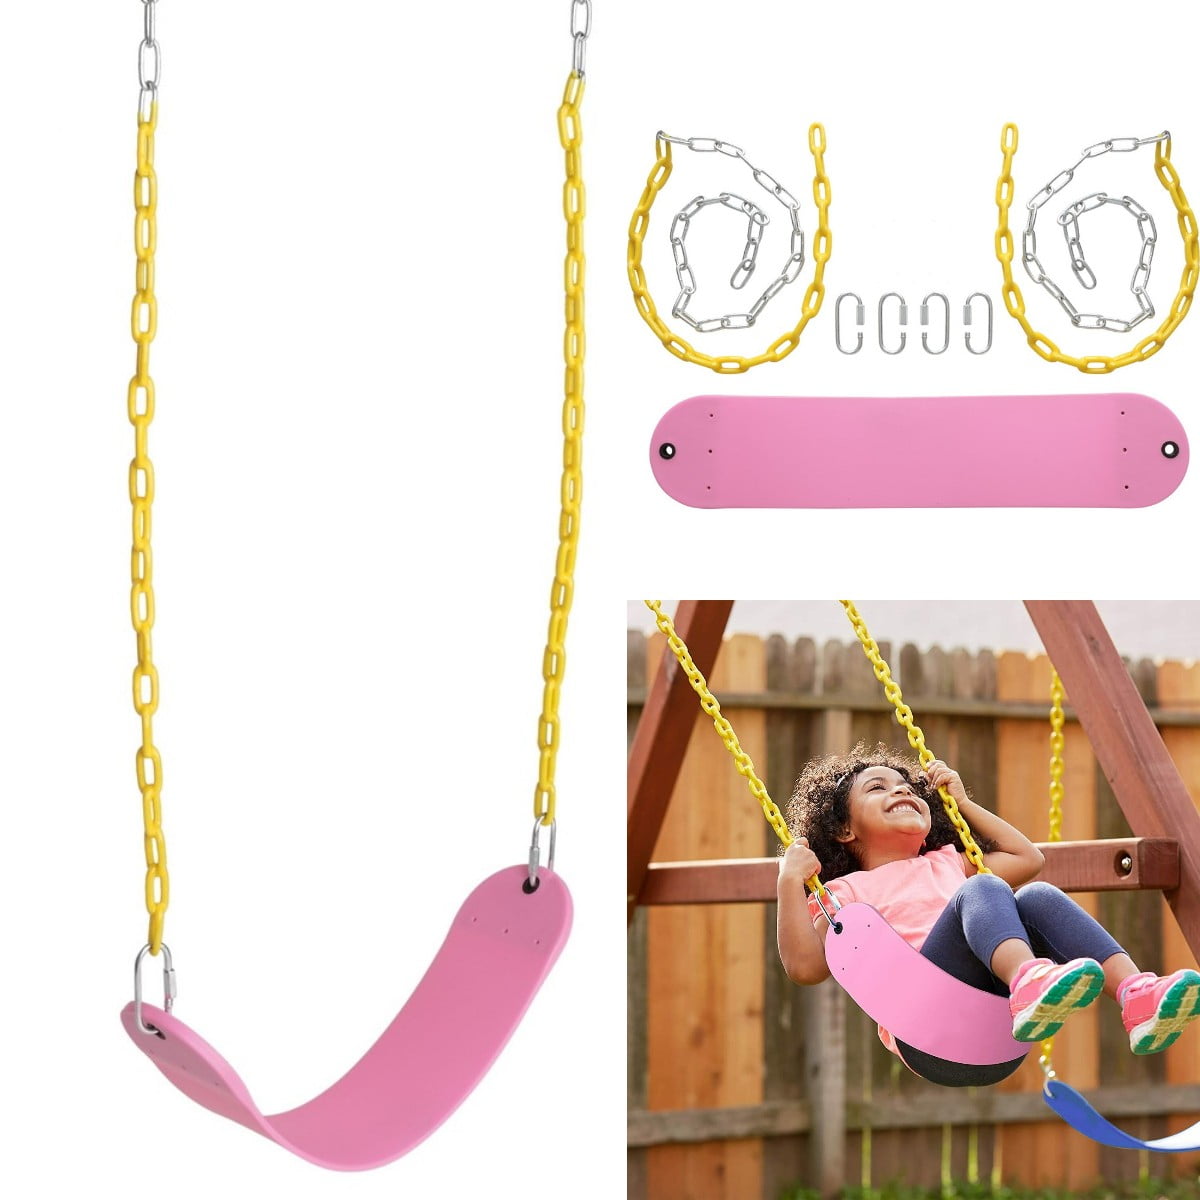 2X Swings Seat Outdoor Playground Swing Set Replacement Accessories for Kids US 